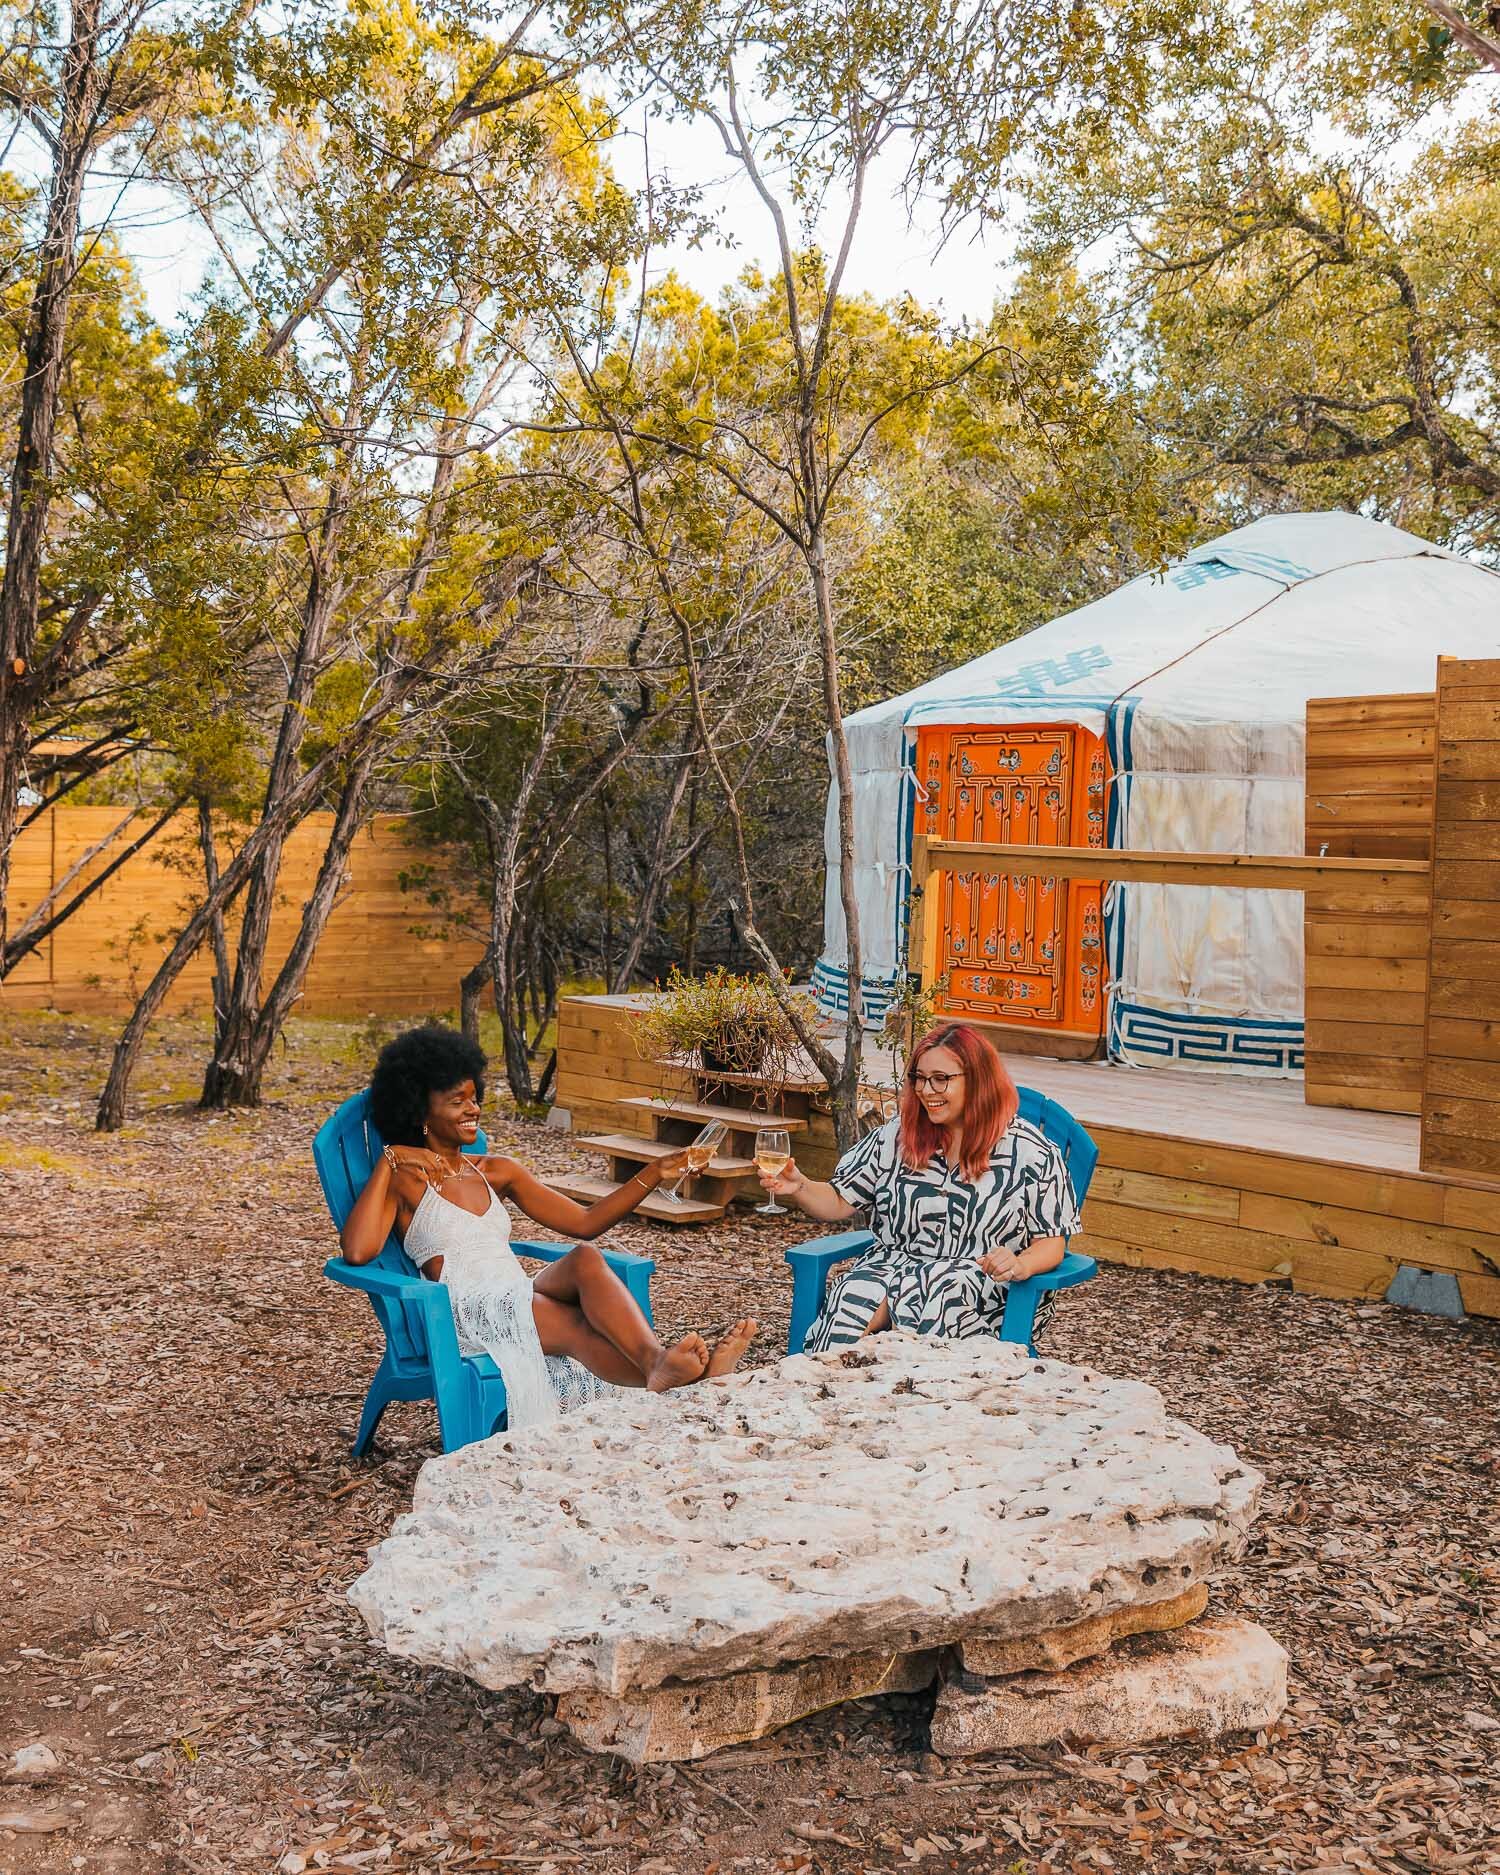 Yurtopia Wimberley yurt glamping in Central Texas Hill Country // The Best Day Trips from Austin, Texas #atx #travel #texas #roadtrip